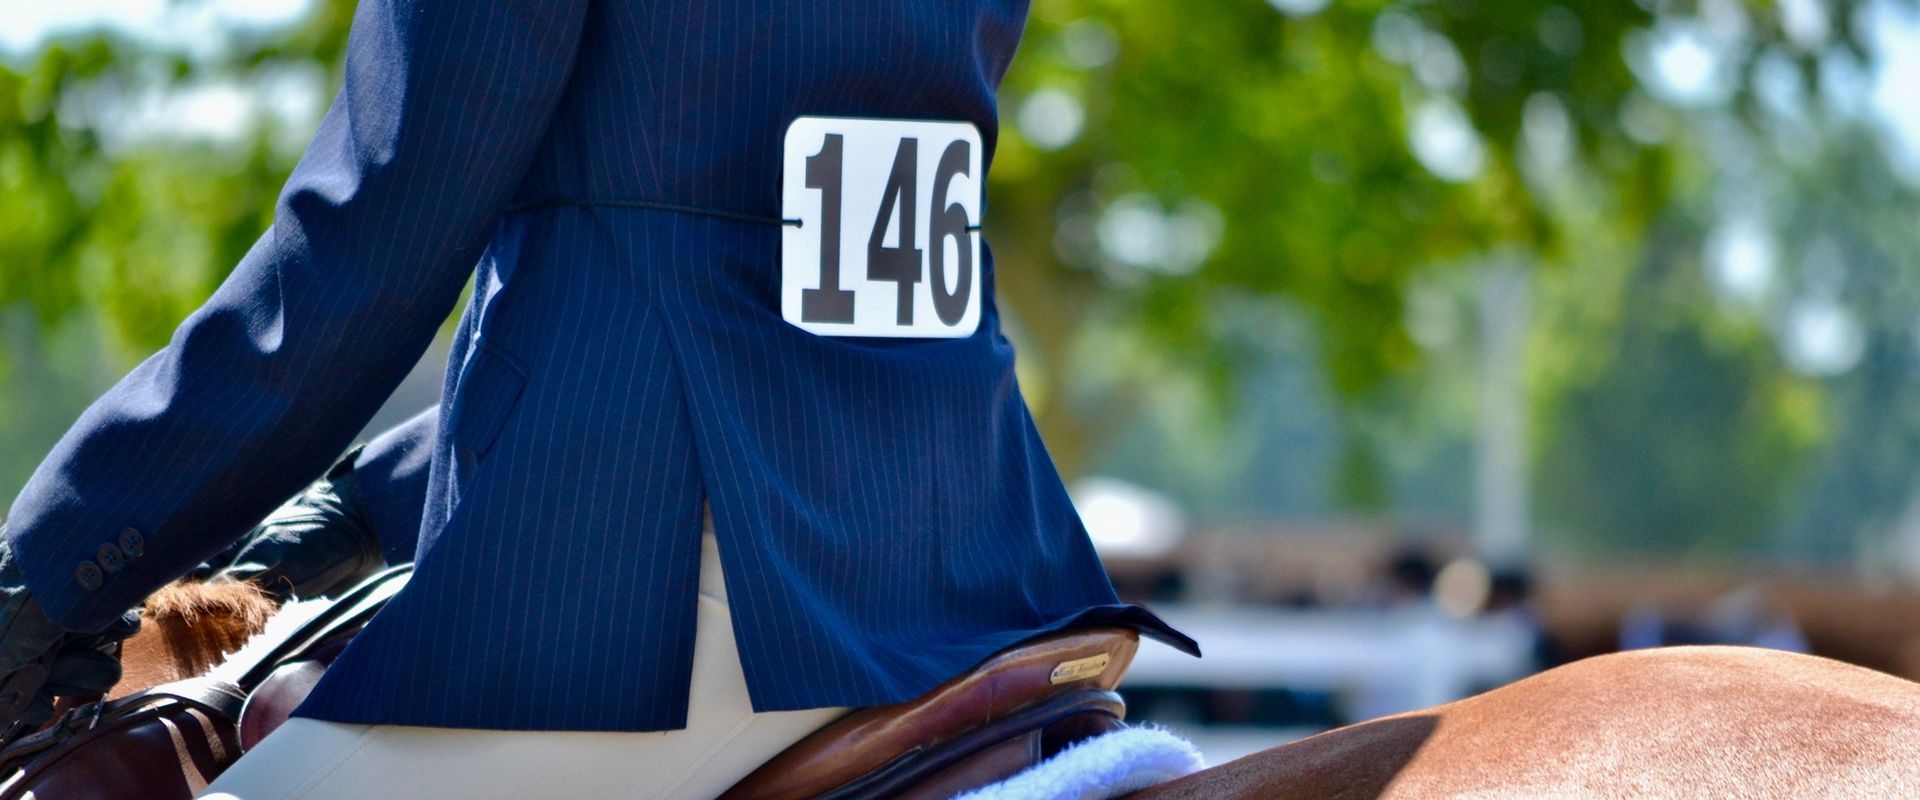 Female on the back of a brown horse with a competition number fixed to her show jacket